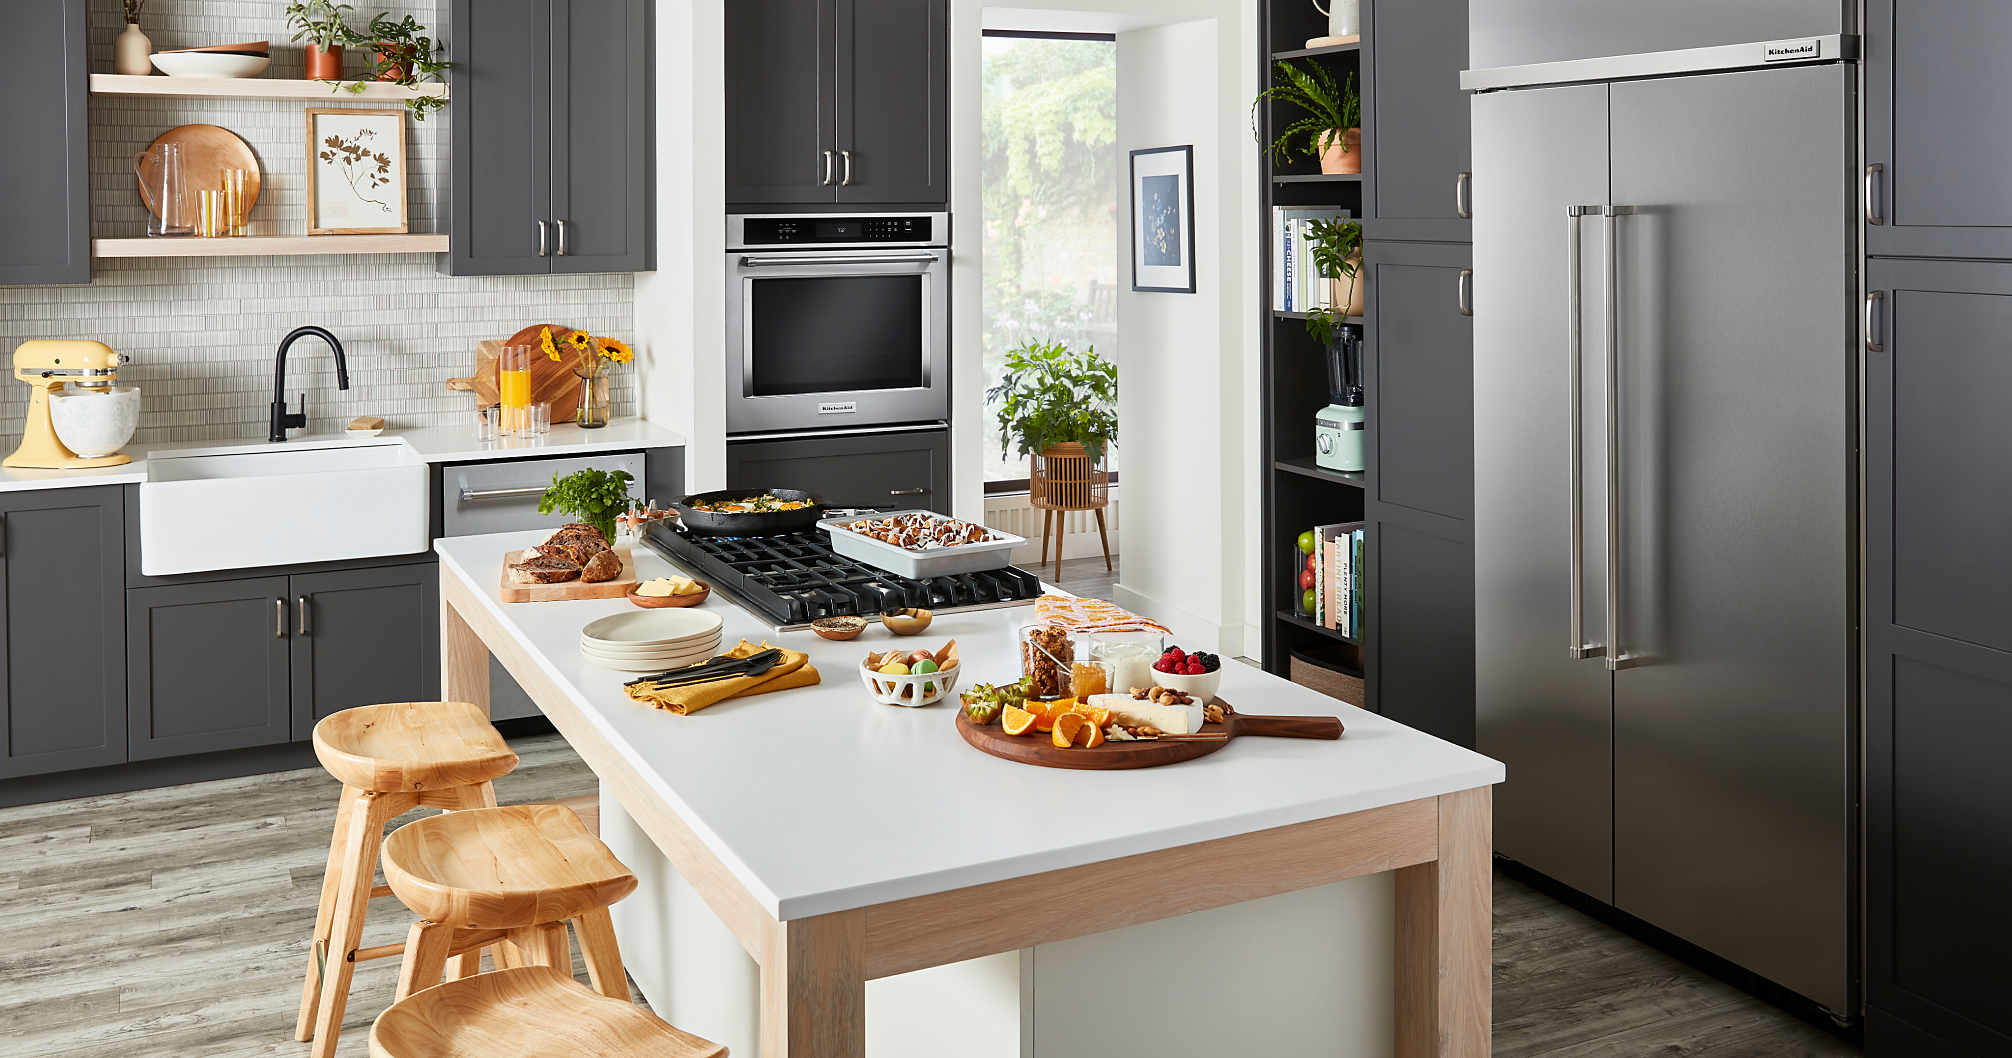 A stylish, modern kitchen filled with KitchenAid® appliances and prepared dishes on the island.